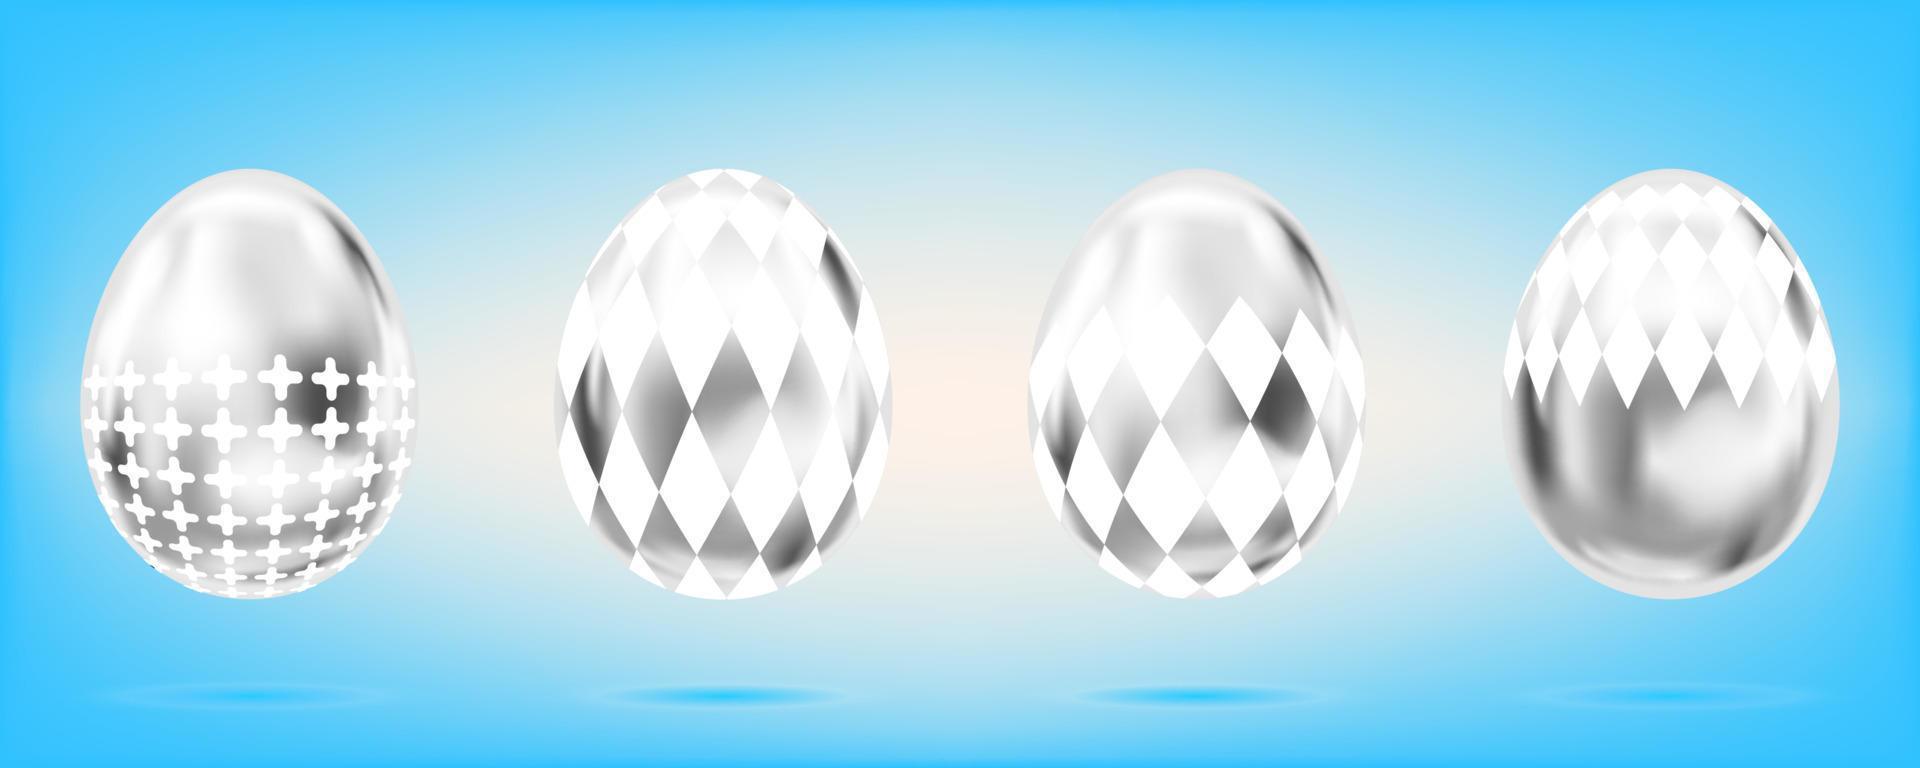 Four silver eggs on the sky blue background. Isolated objects for Easter decoration. Cross and domino rumb ornate vector